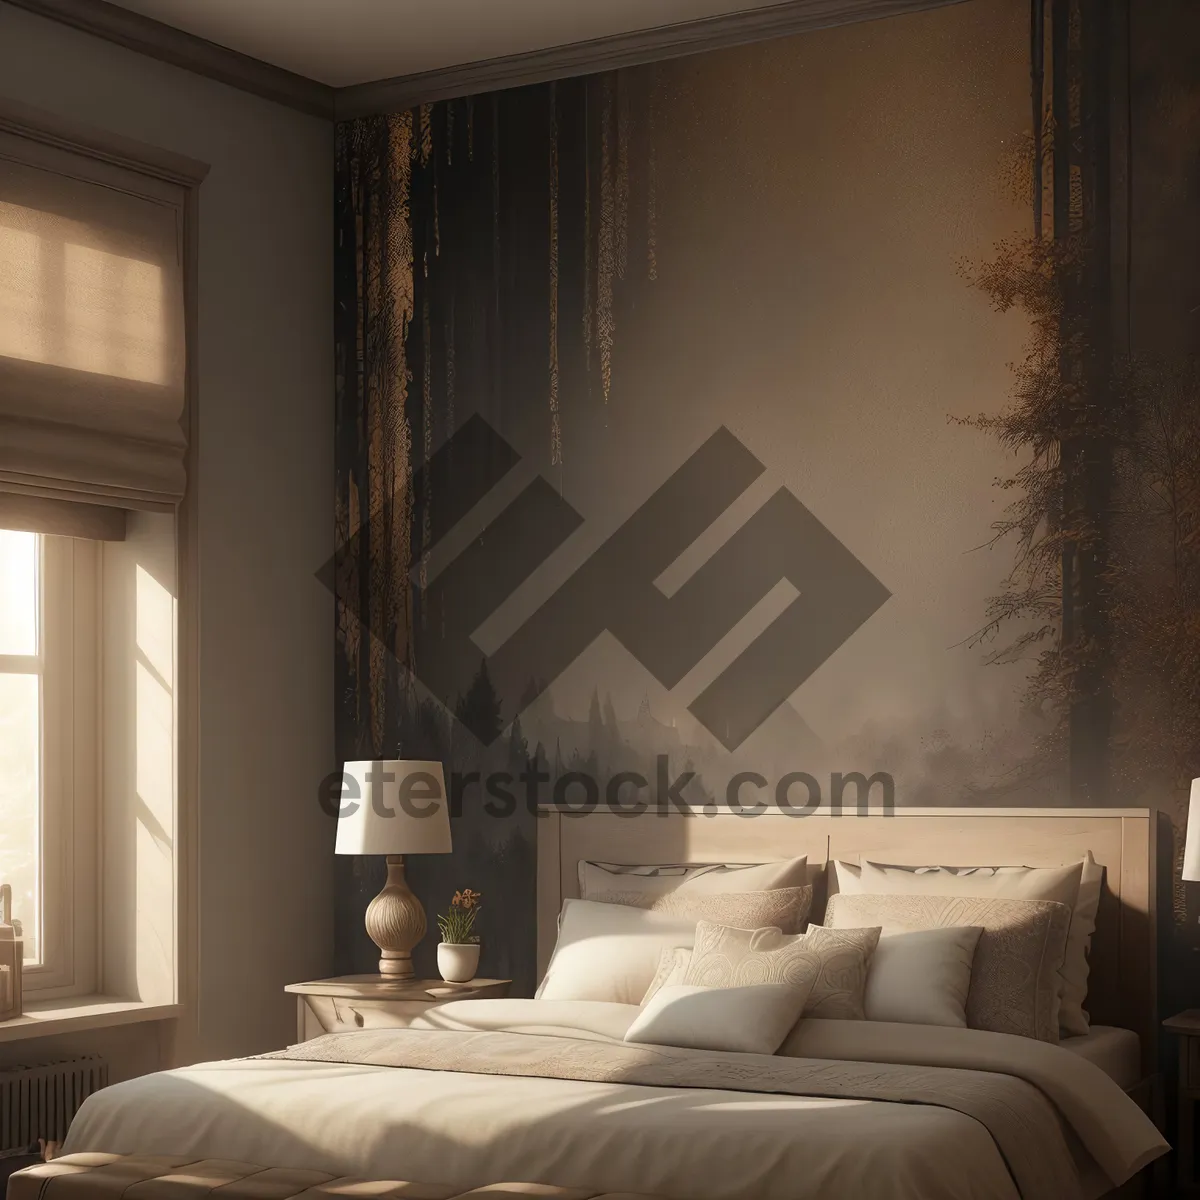 Picture of Modern Bedroom with Stylish Interior Décor